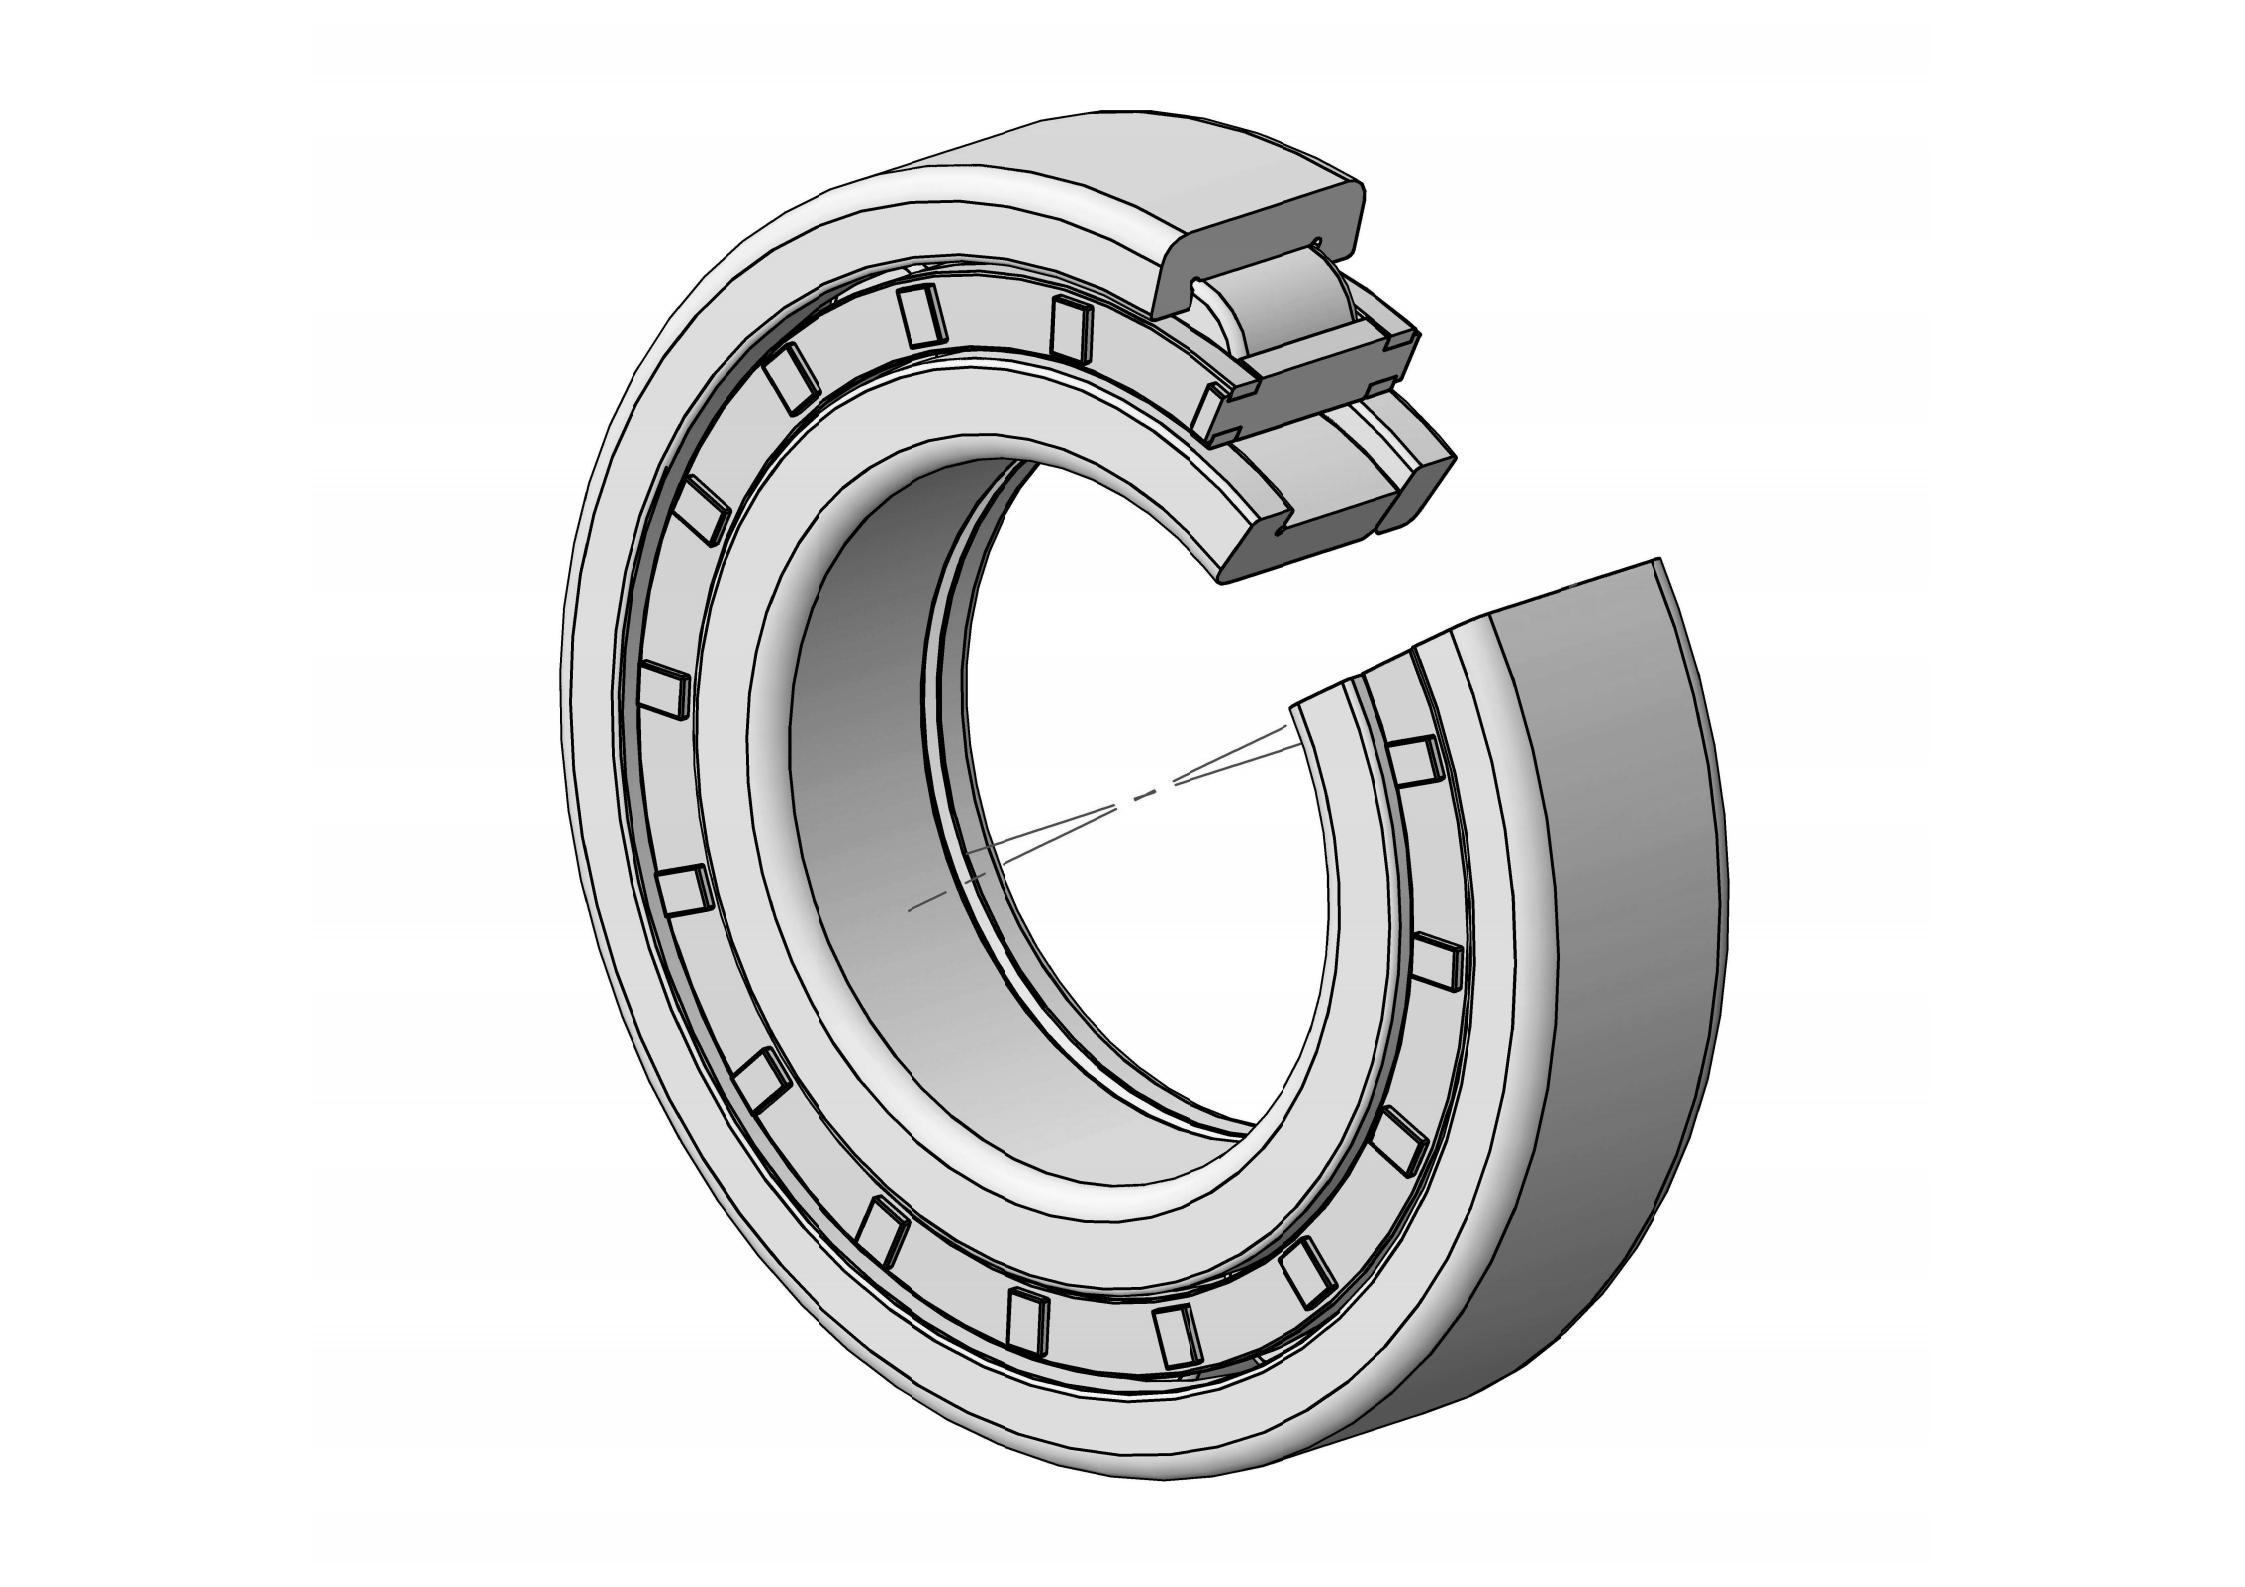 NUP219-EM Single Row Cylindrical roller bearing 